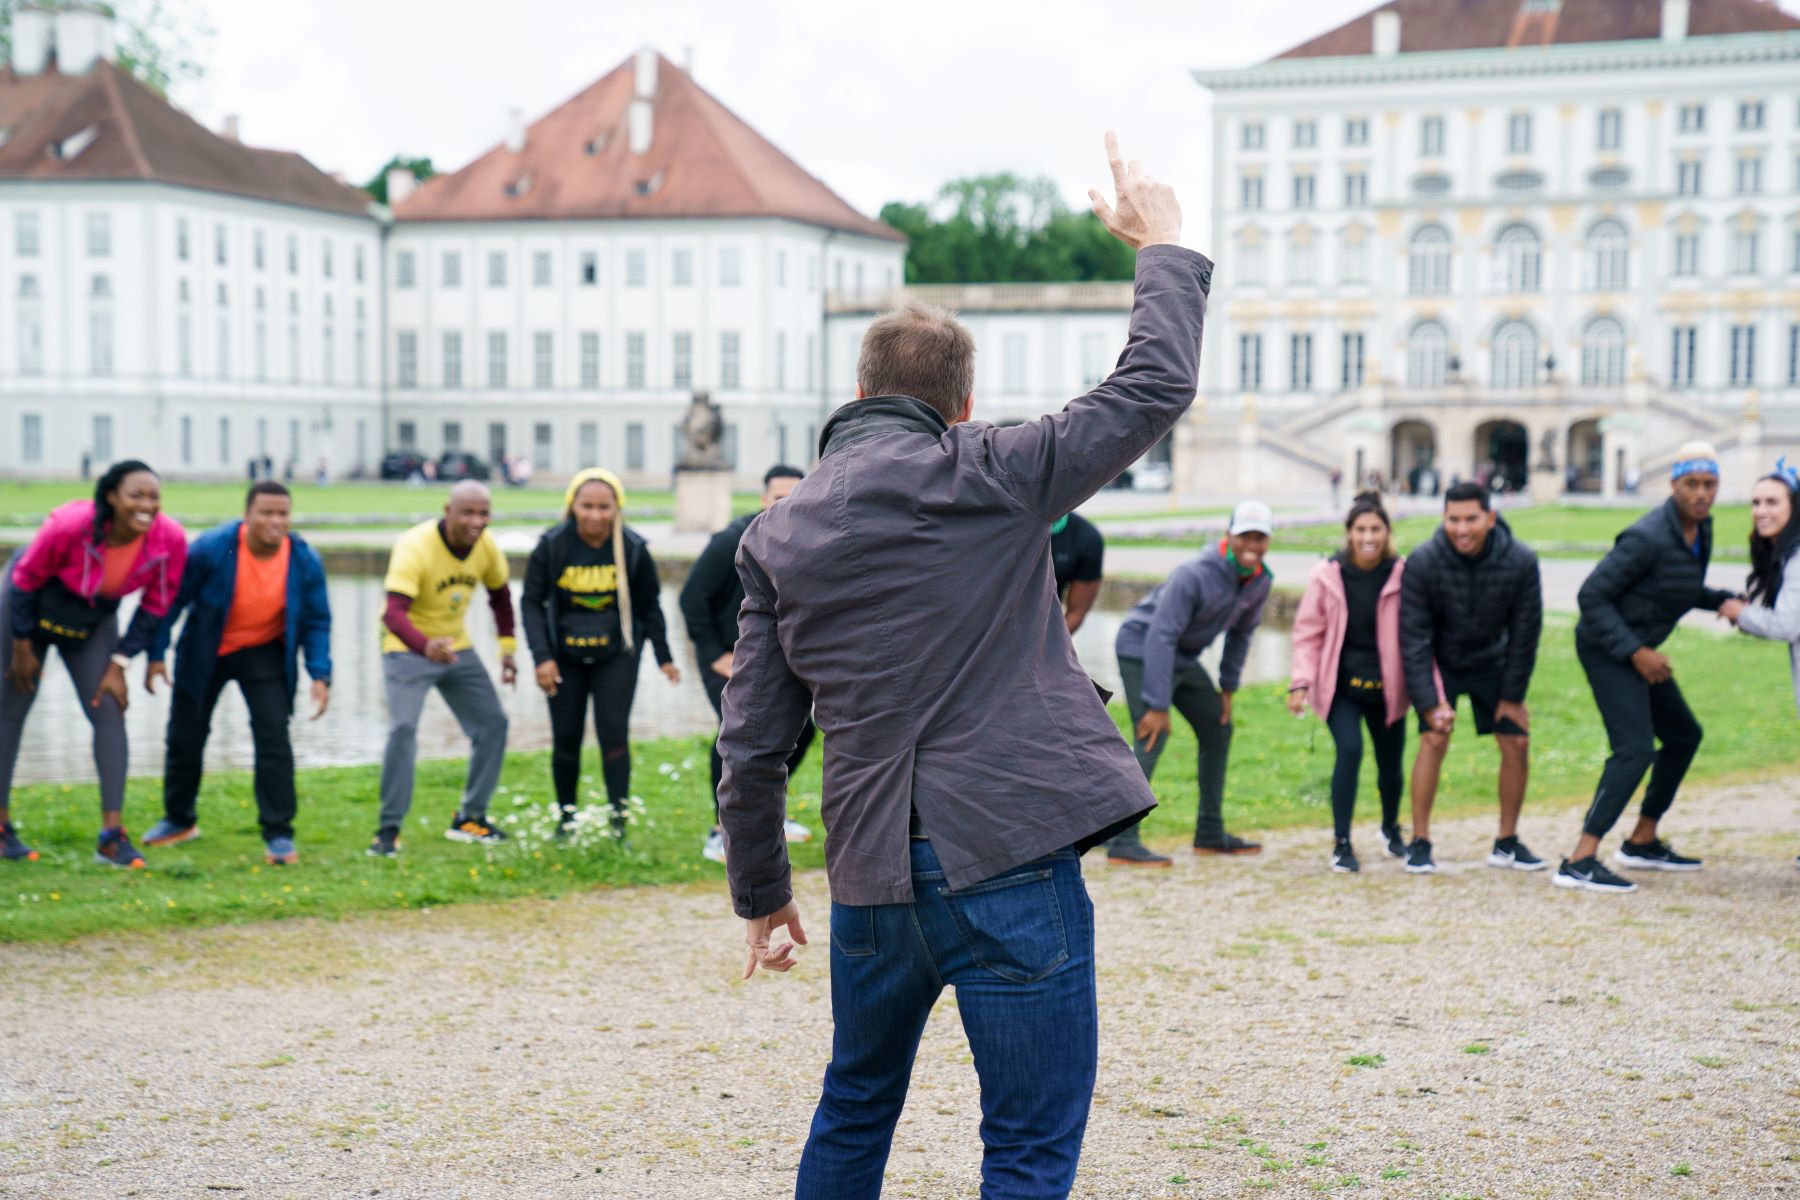 Host Phil Keoghan signals for the teams in 'The Amazing Race 34' to begin racing in the premiere, which took place in Munich, Germany. Phil wears a dark gray coat and jeans.